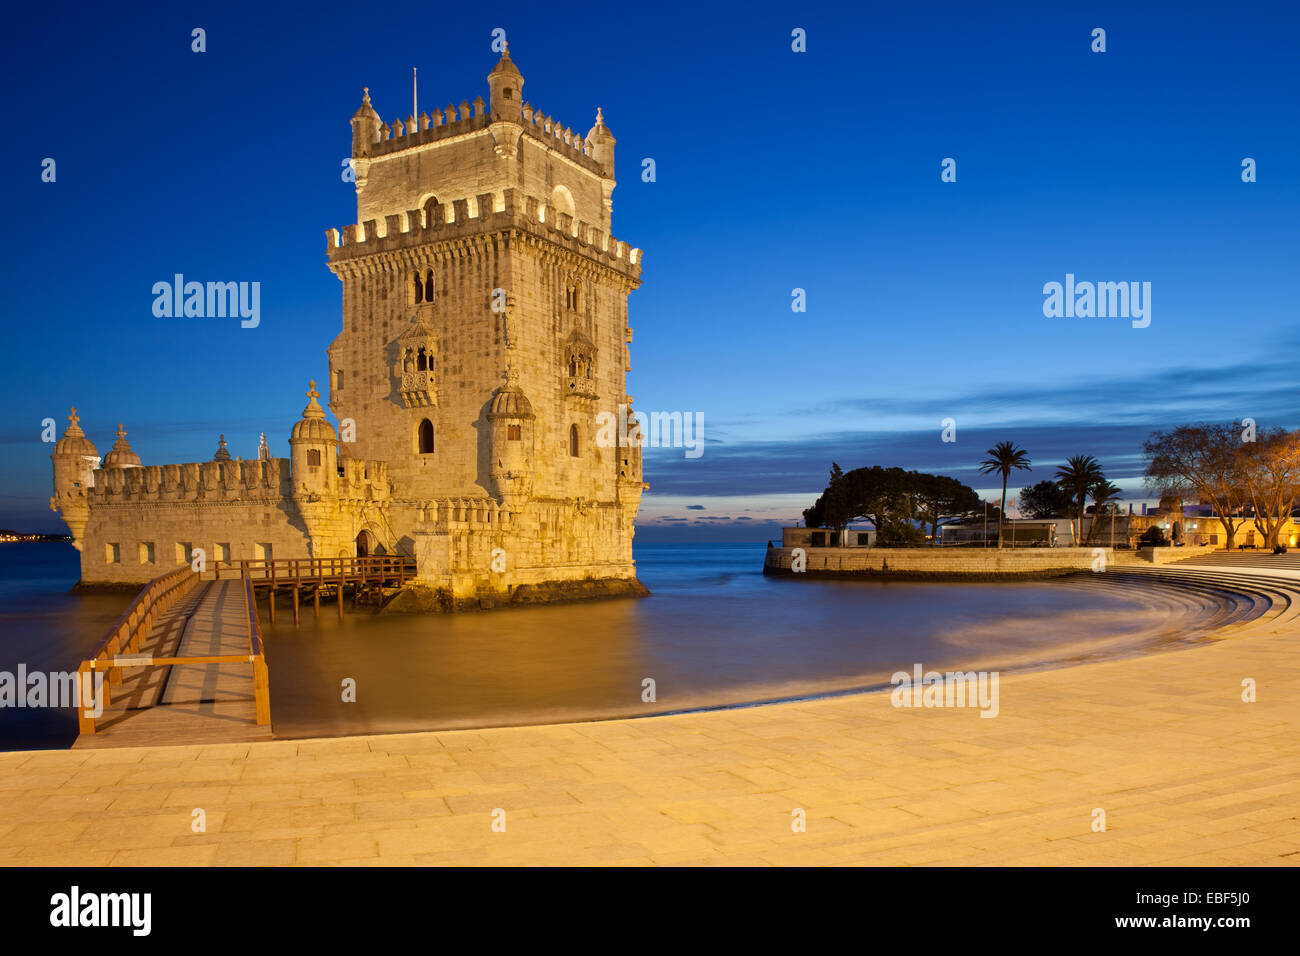 Belem Tower at night in Lisbon, Portugal. Stock Photo